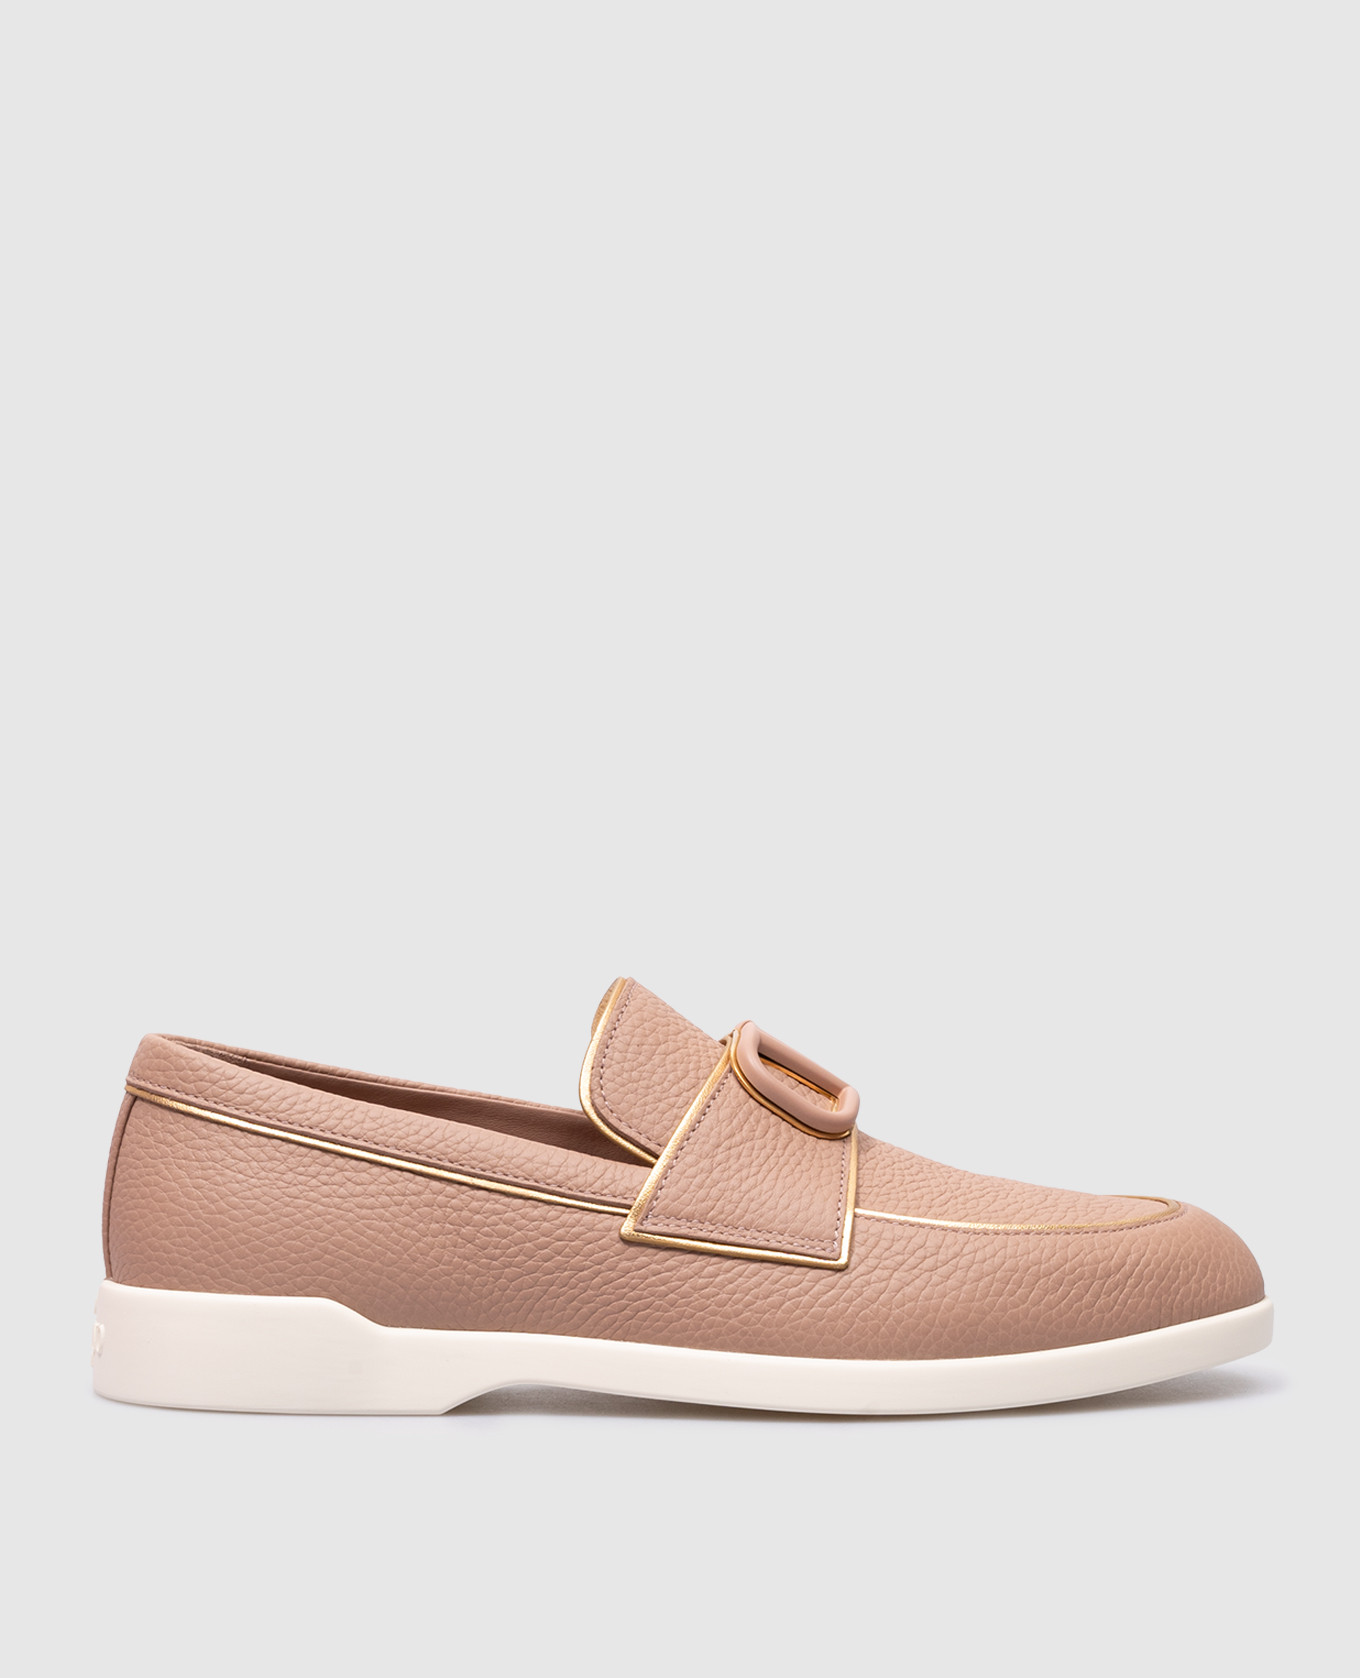 Leisure Flows VLogo Signature Loafers in beige leather